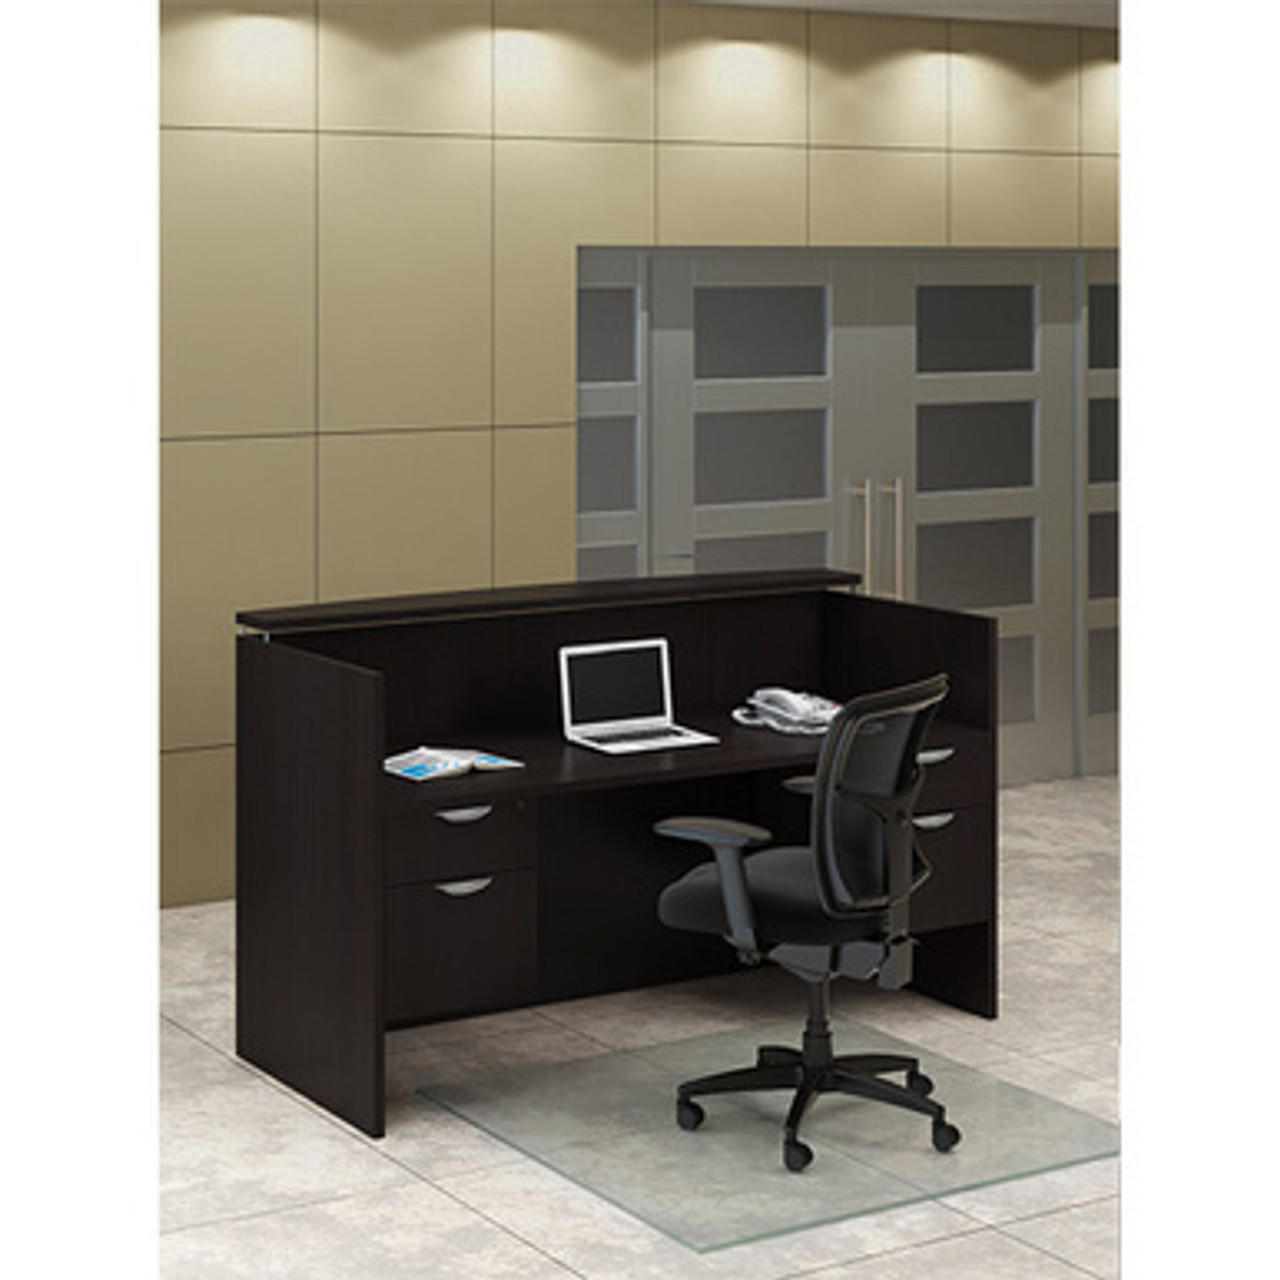  Office Source 71"W x 36"D Reception Desk with Floating Transaction Counter OS98 